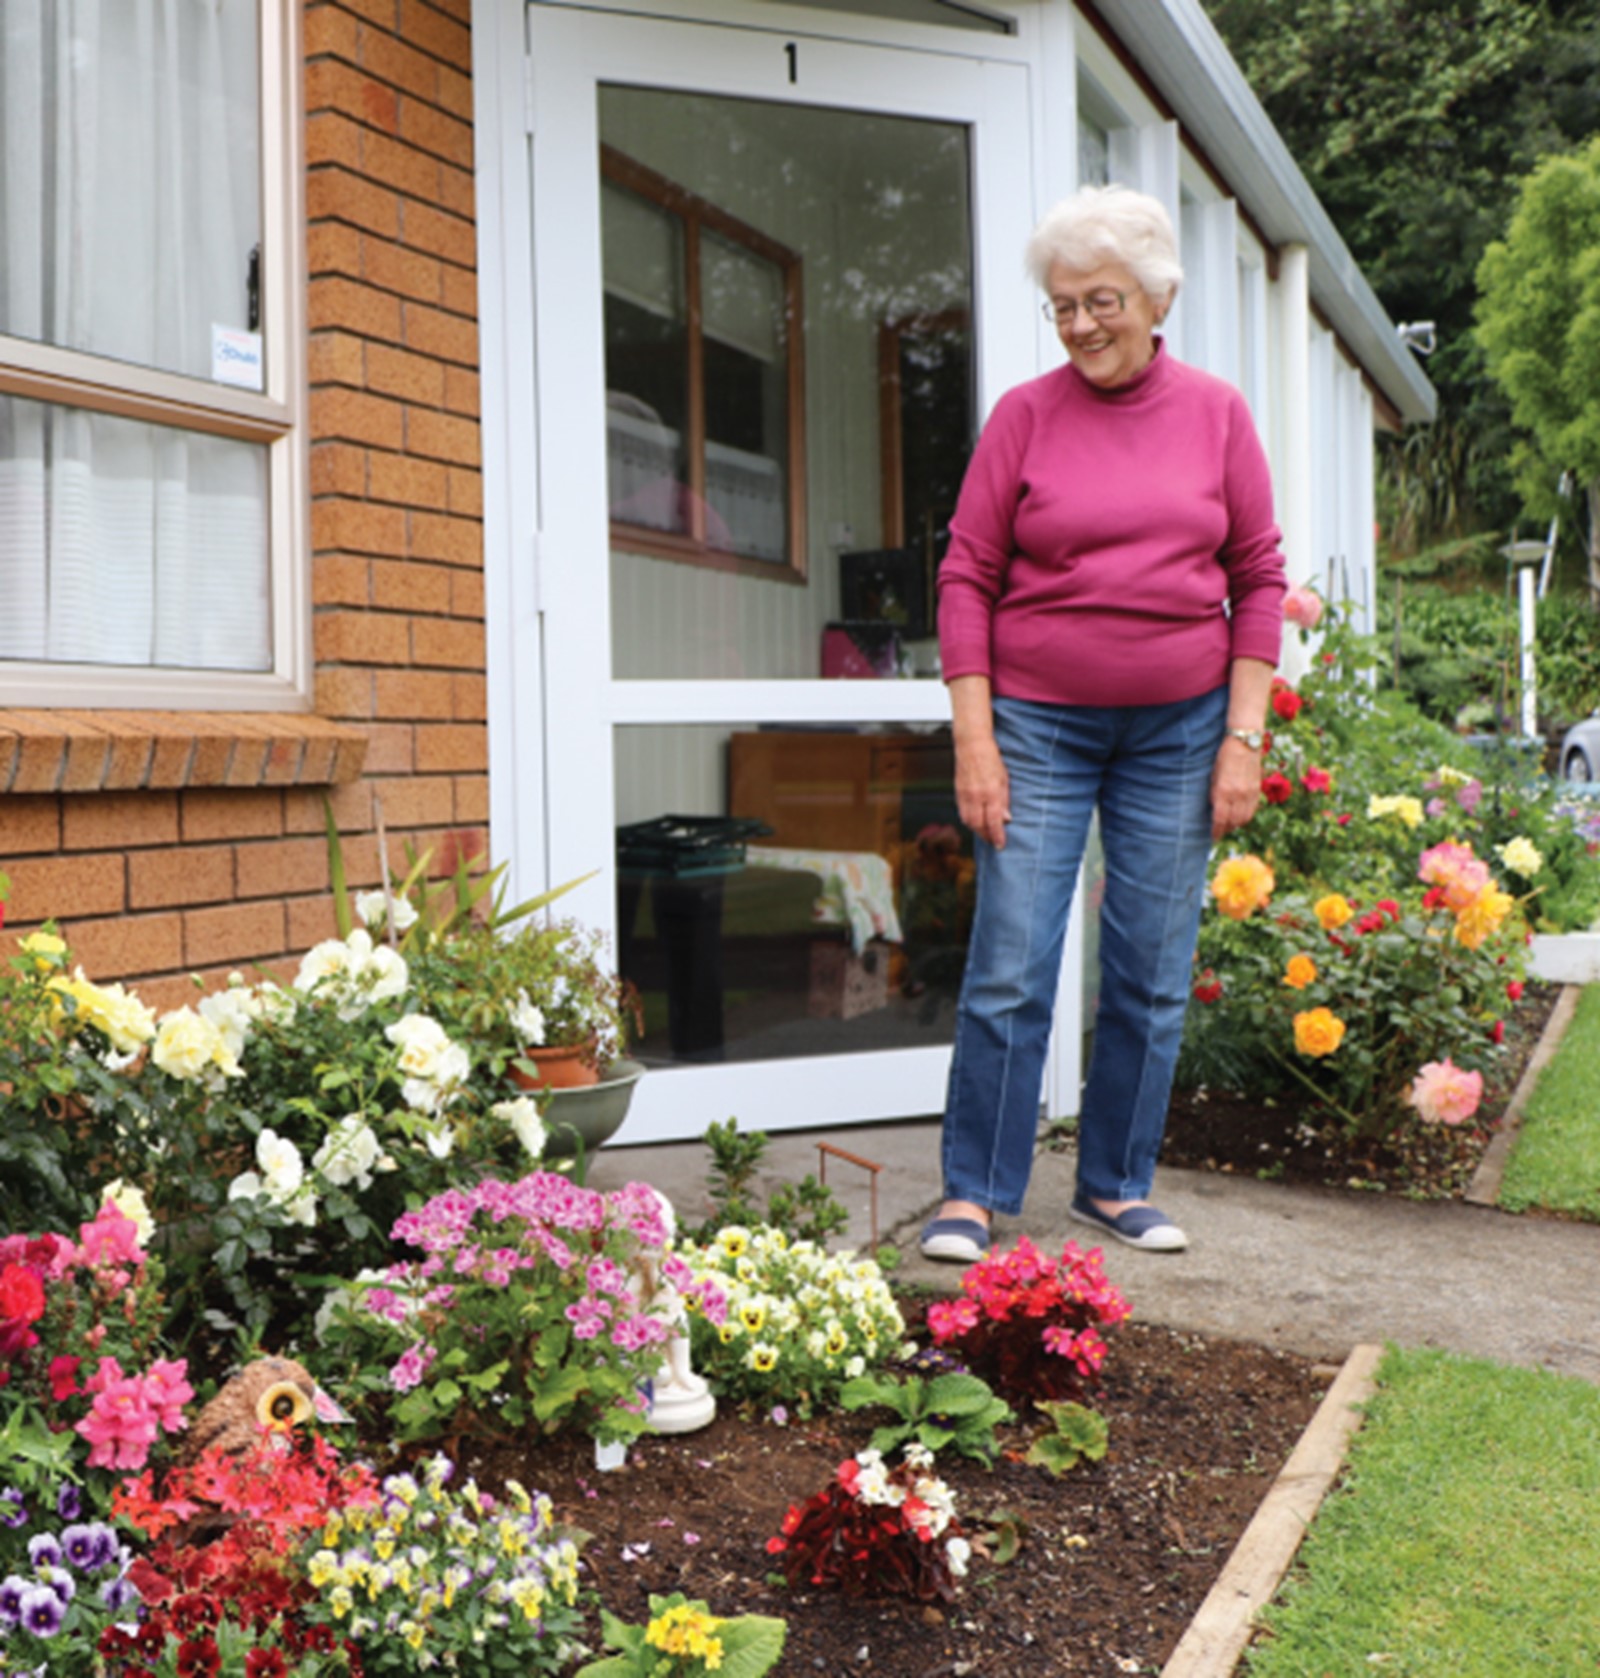 Elderly woman outside of her Council flat with flower garden